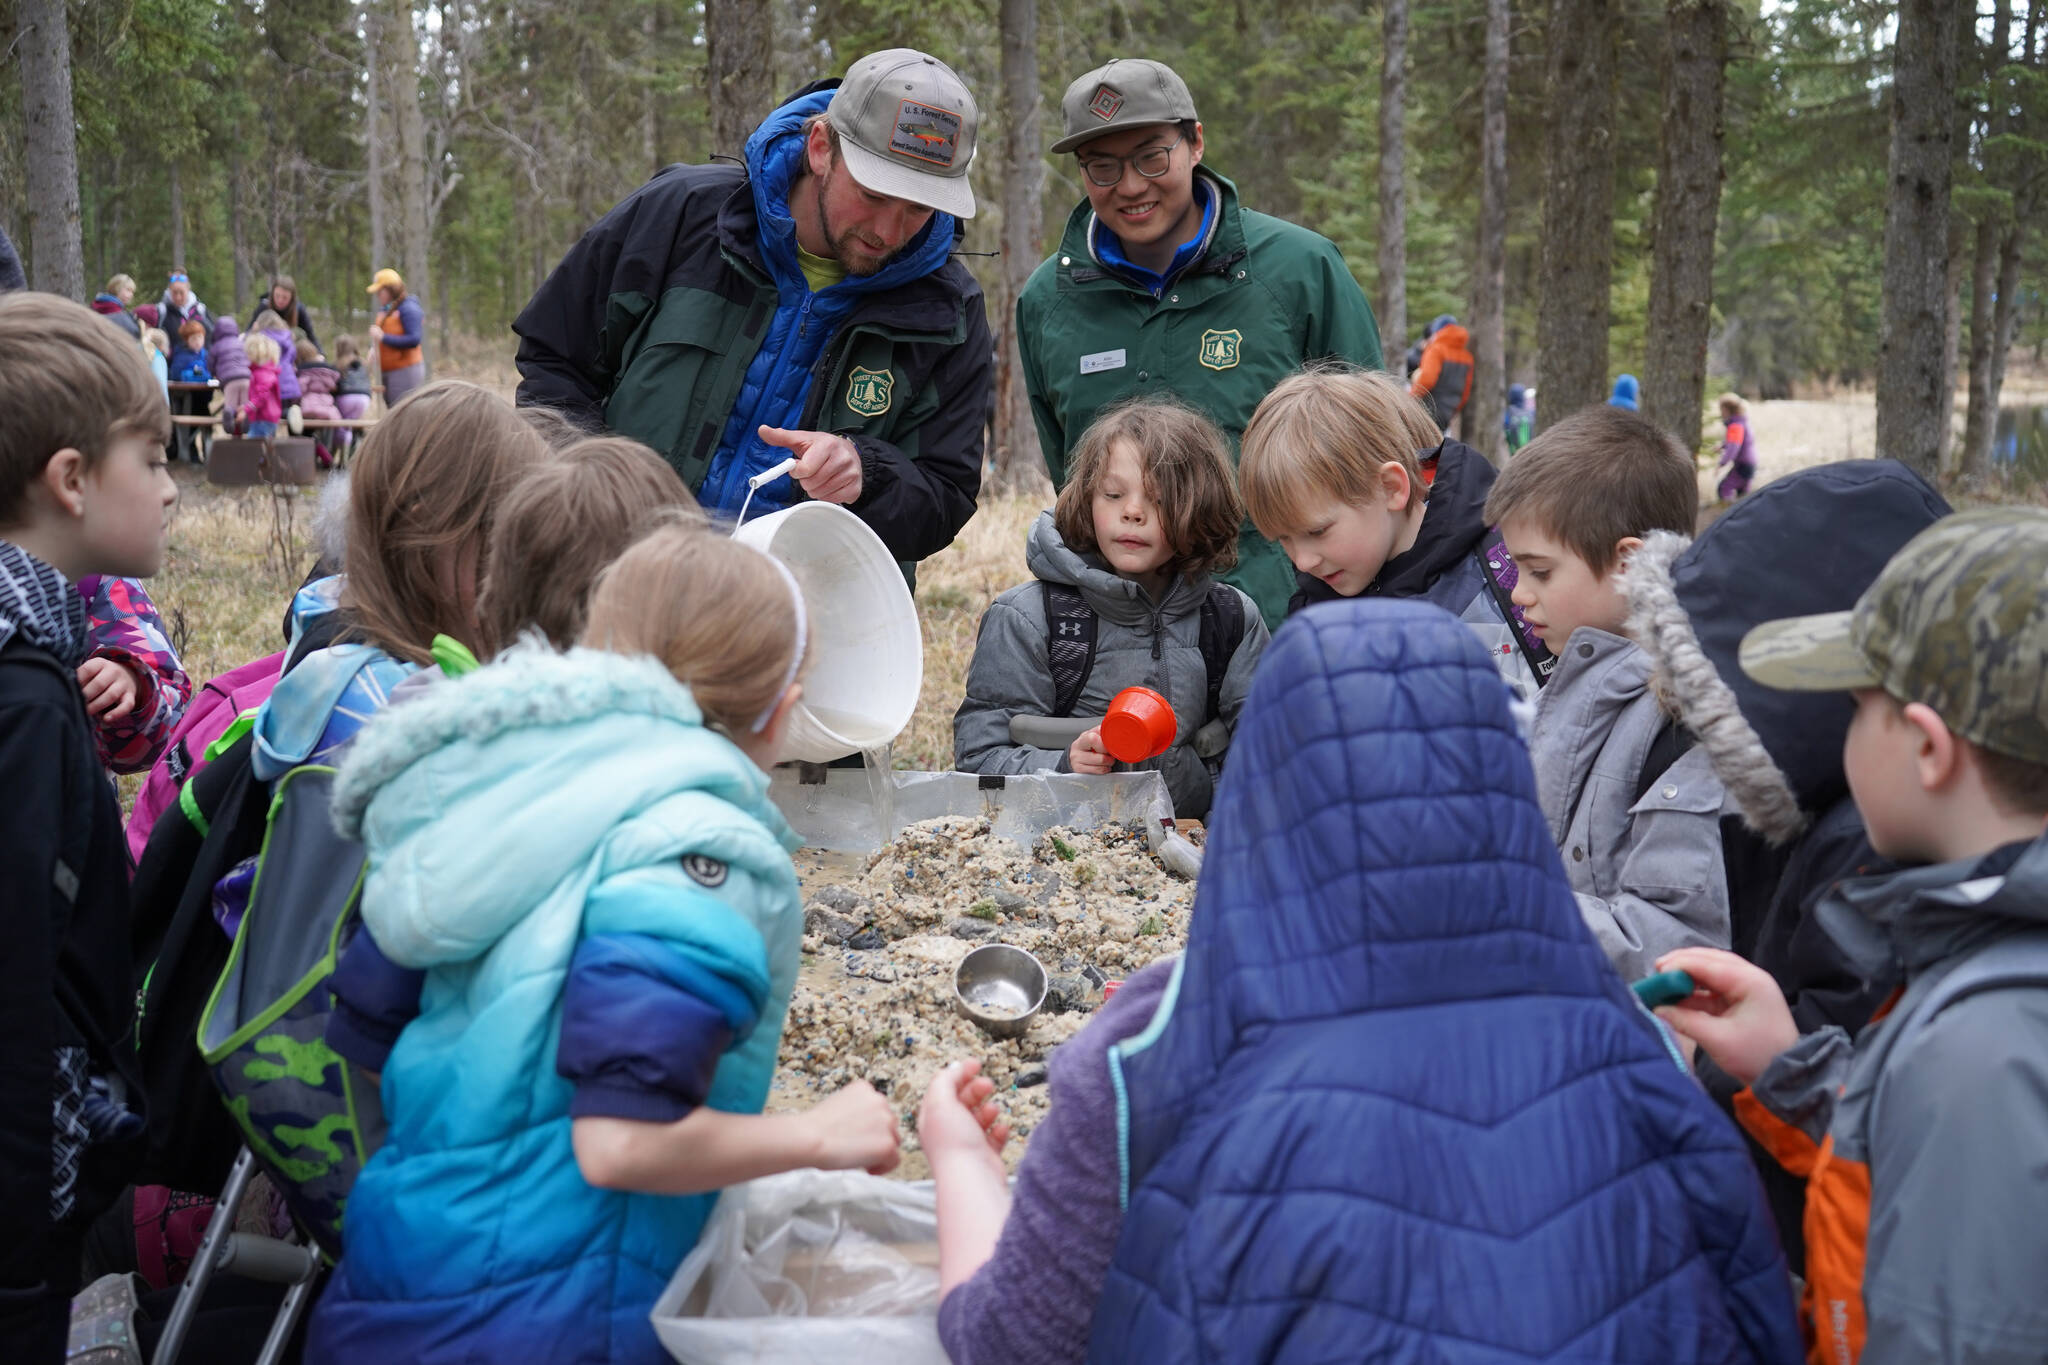 Members of the United States Forest Service demonstrate the flow of a river to elementary students during Salmon Celebration on Wednesday, May 10, 2023, at Johnson Lake in Kasilof, Alaska. (Jake Dye/Peninsula Clarion)